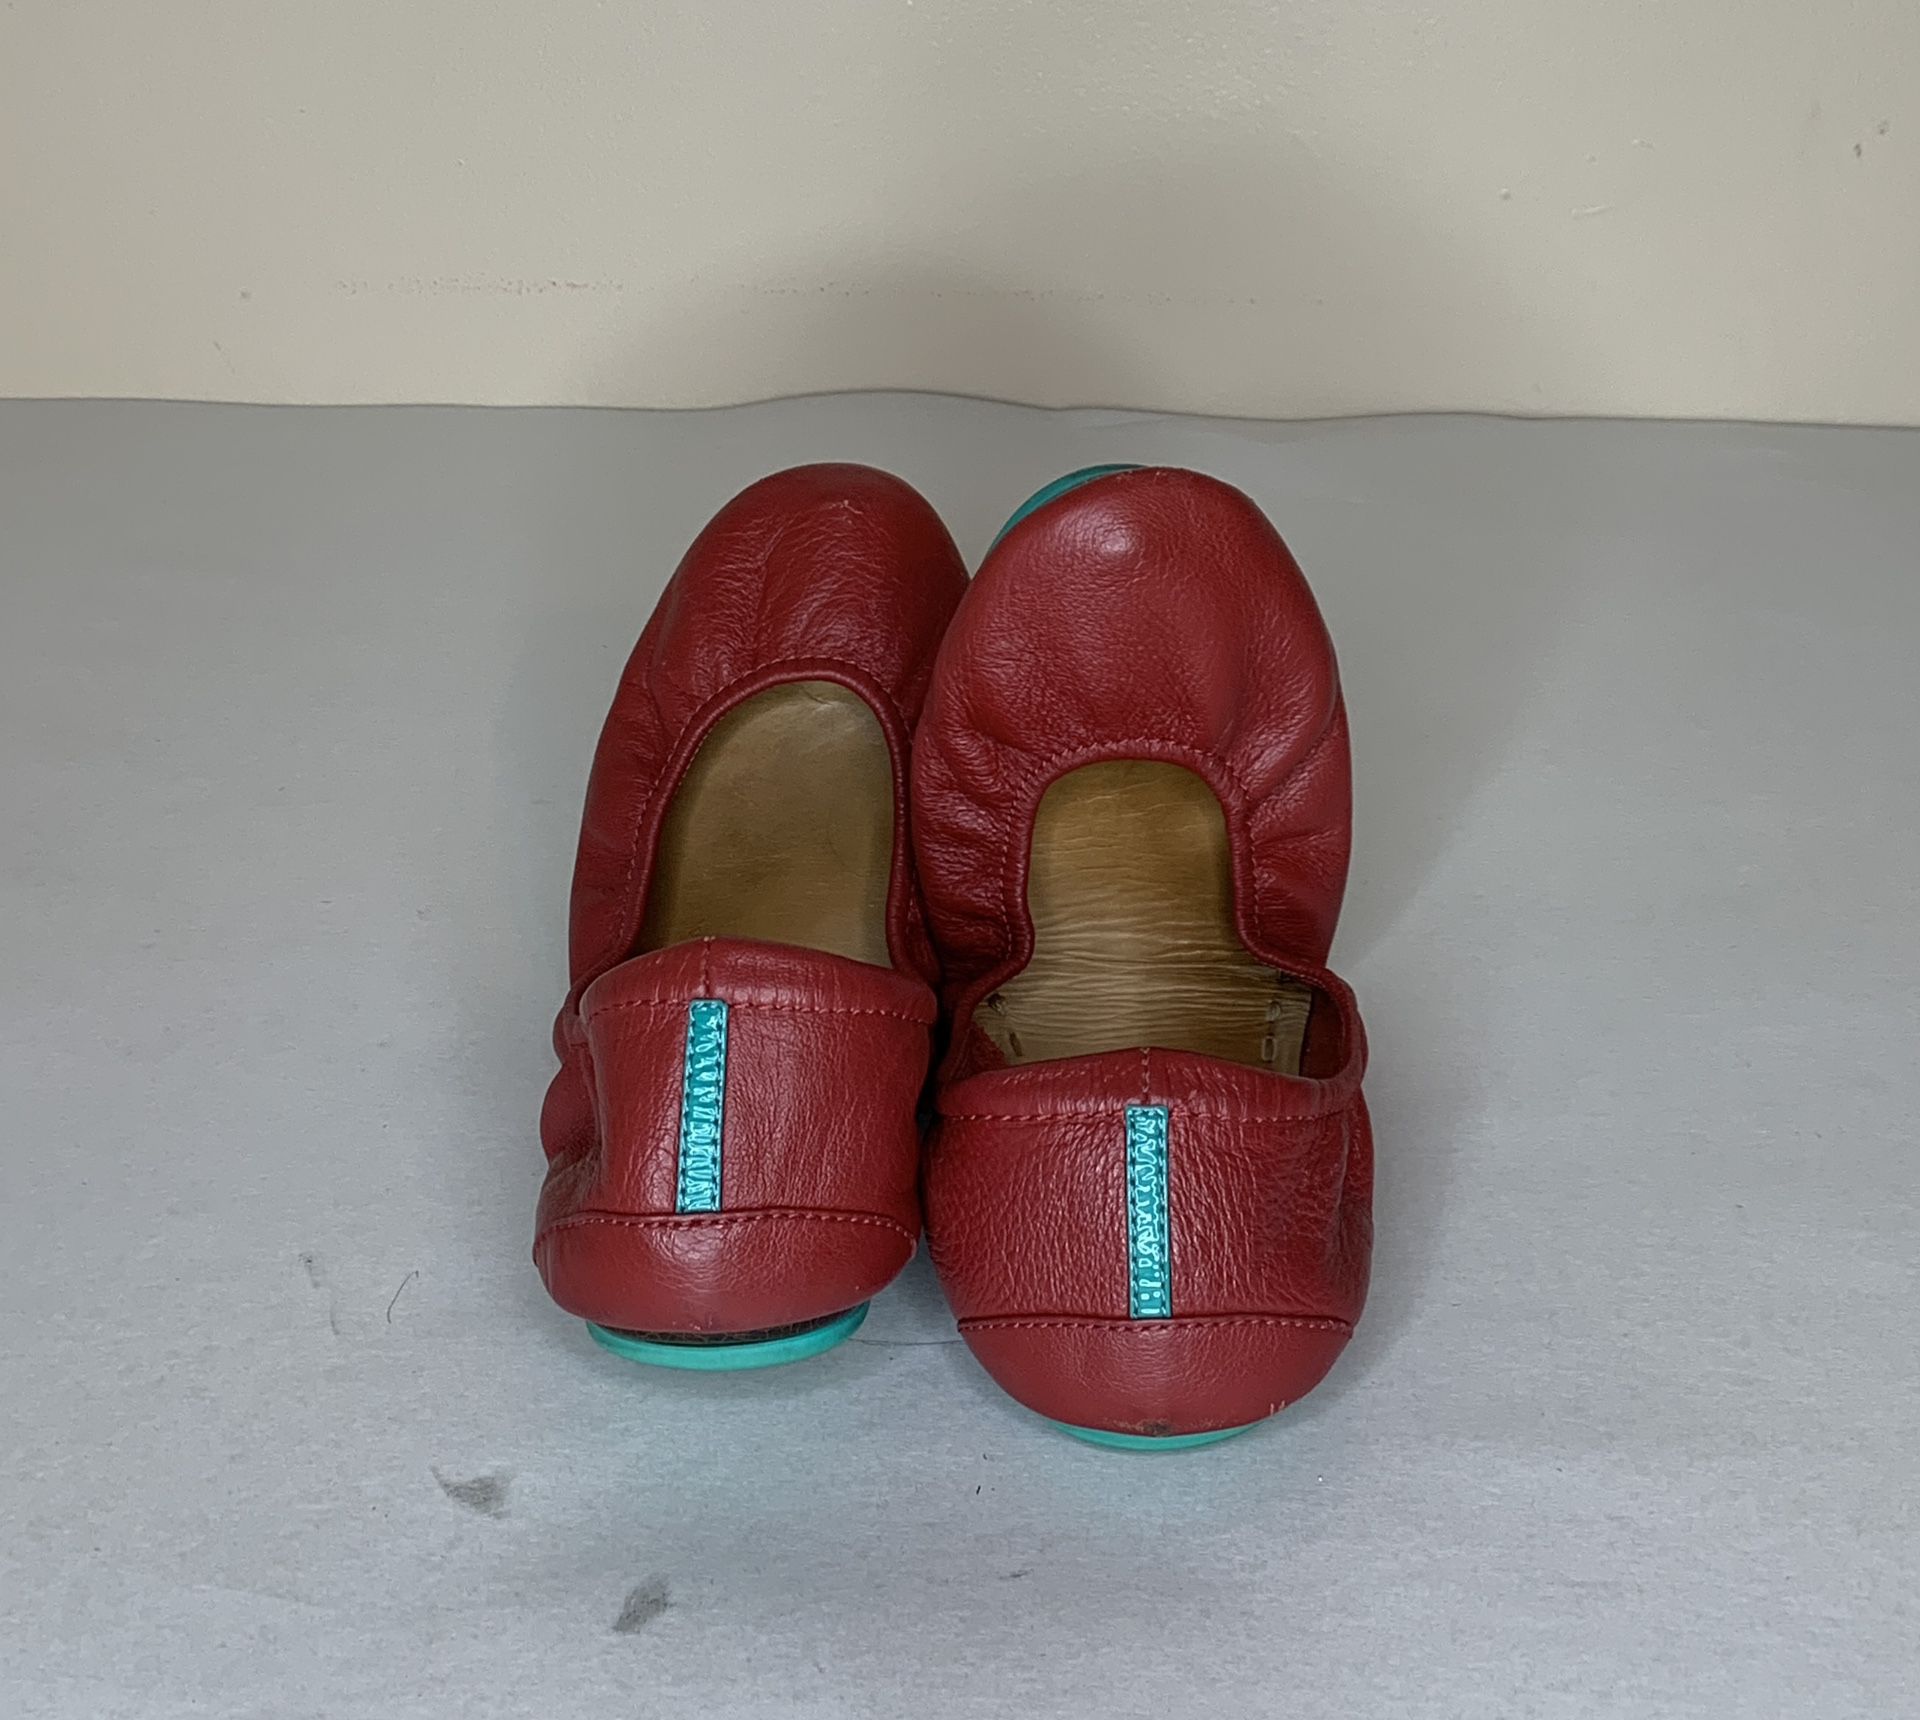 Tieks by Gavrieli Foldable Ballet Flats Size 8 in Cardinal Red Pre-Owned